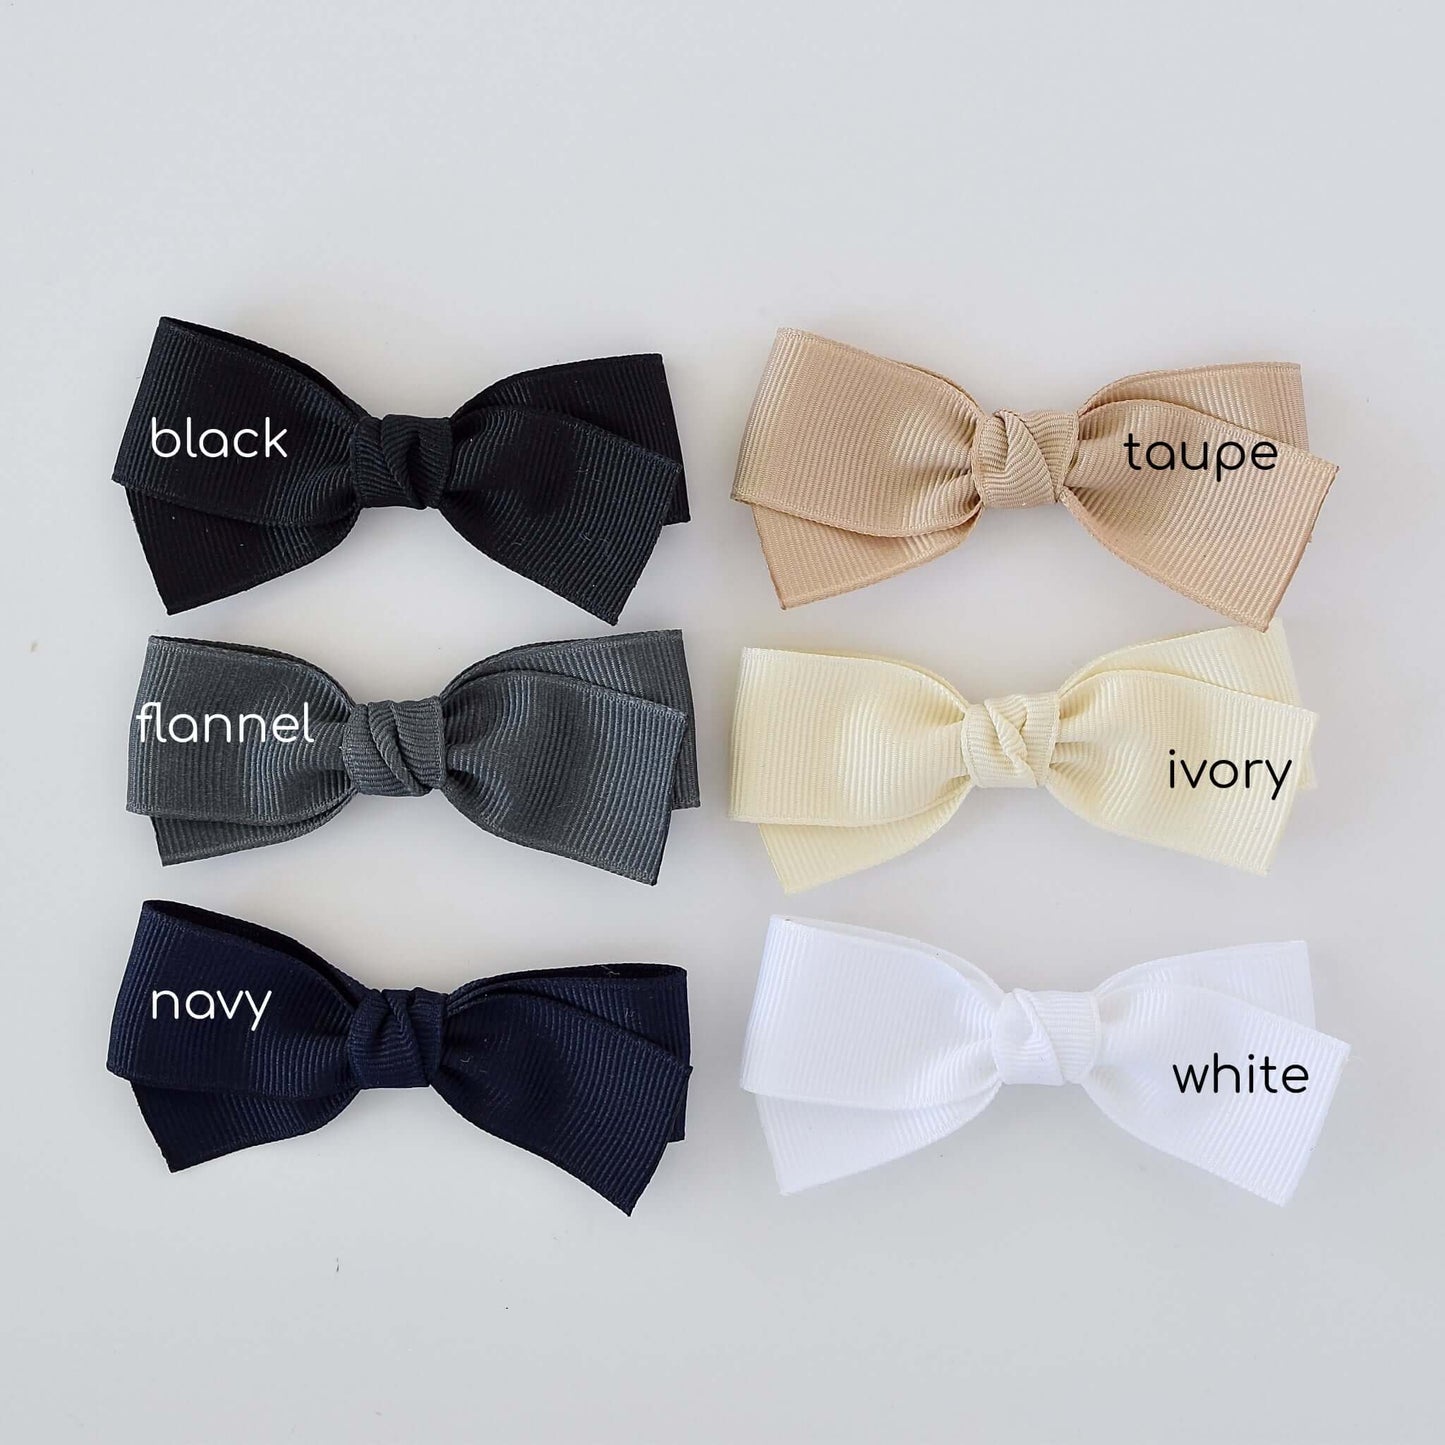 3 inch grosgrain baby Kayla bow clips and headbands in black, taupe, flannel, ivory, navy, and white colors.